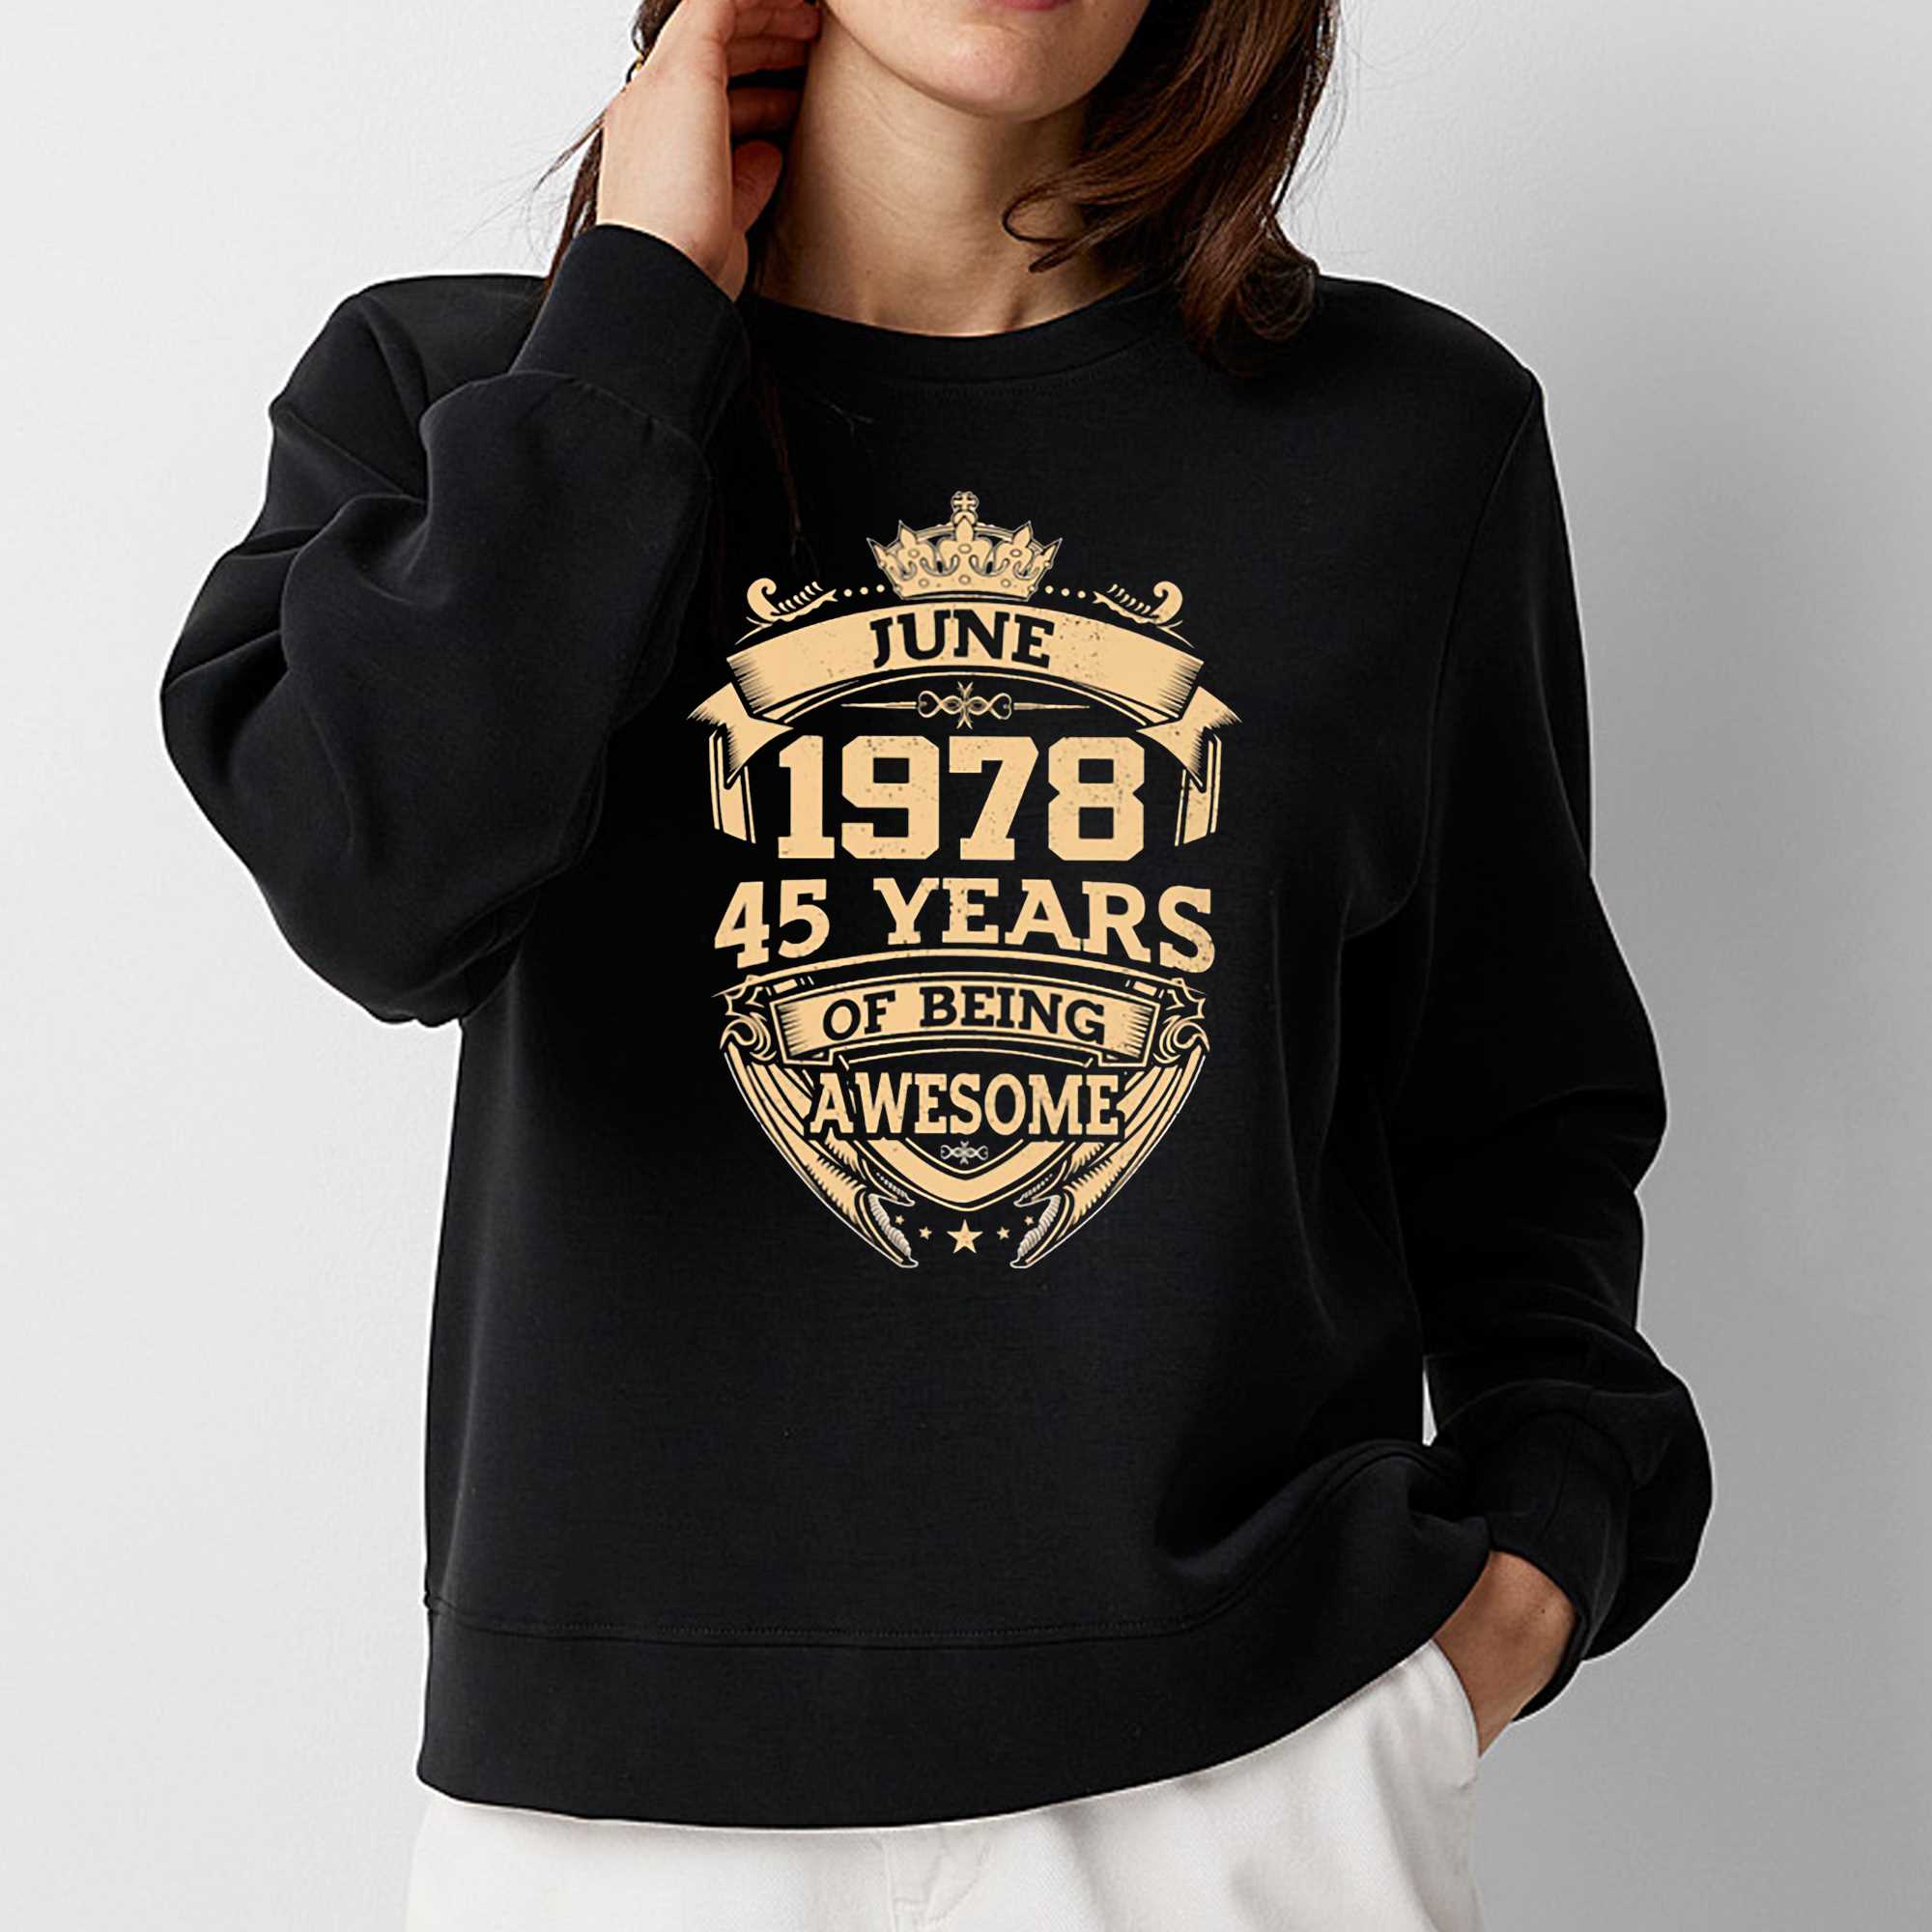 June 1978 45 Years Of Being Awesome Shirt 